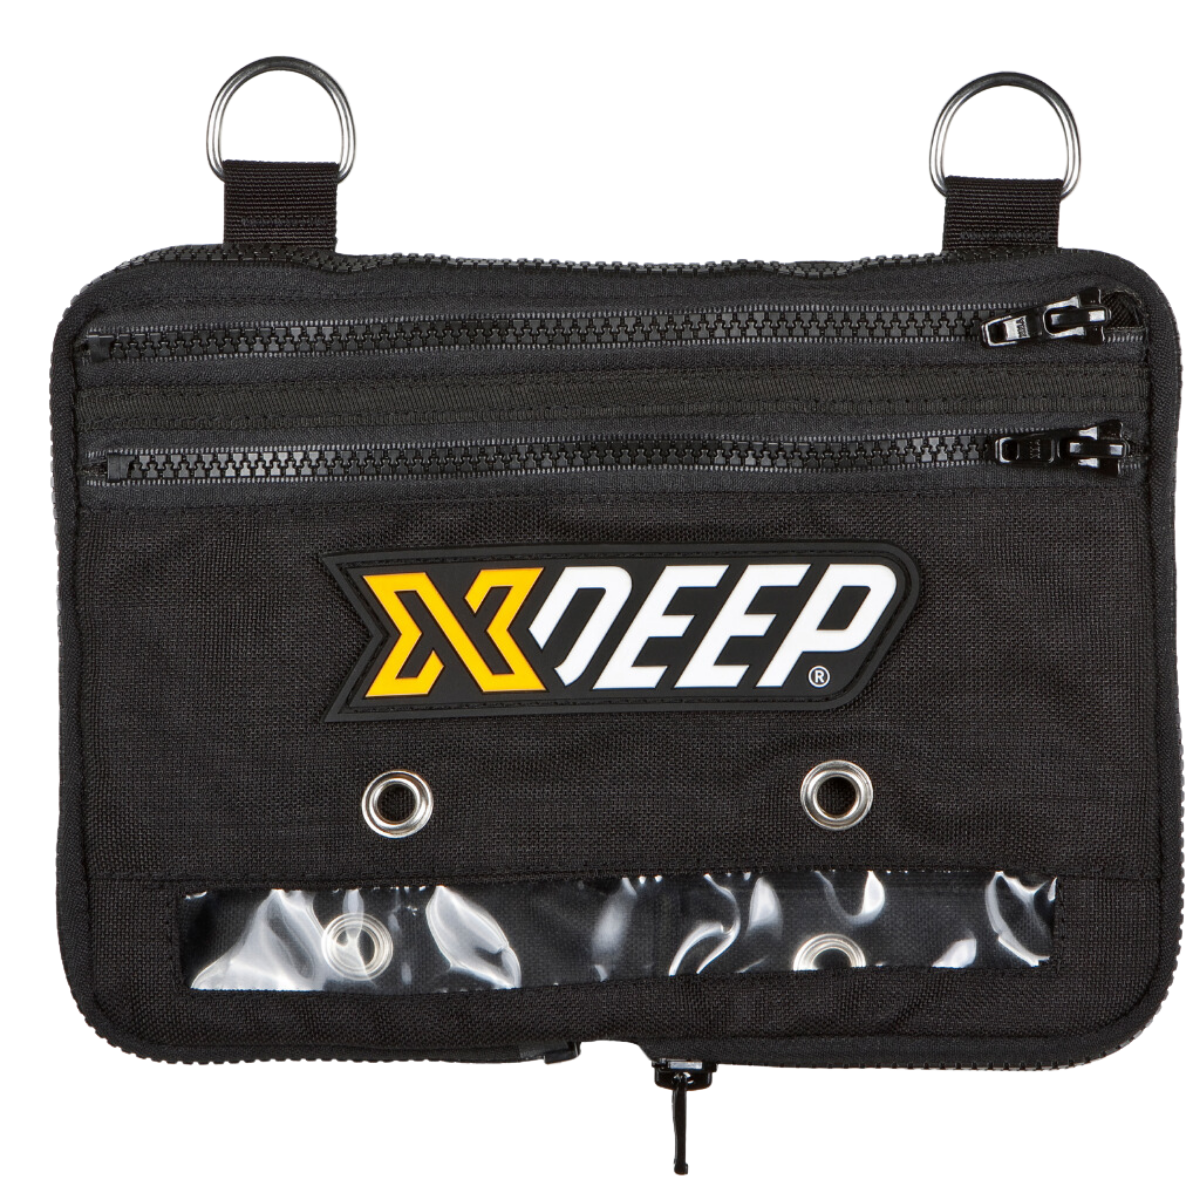 XDEEP EXPANDABLE CARGO POUCH